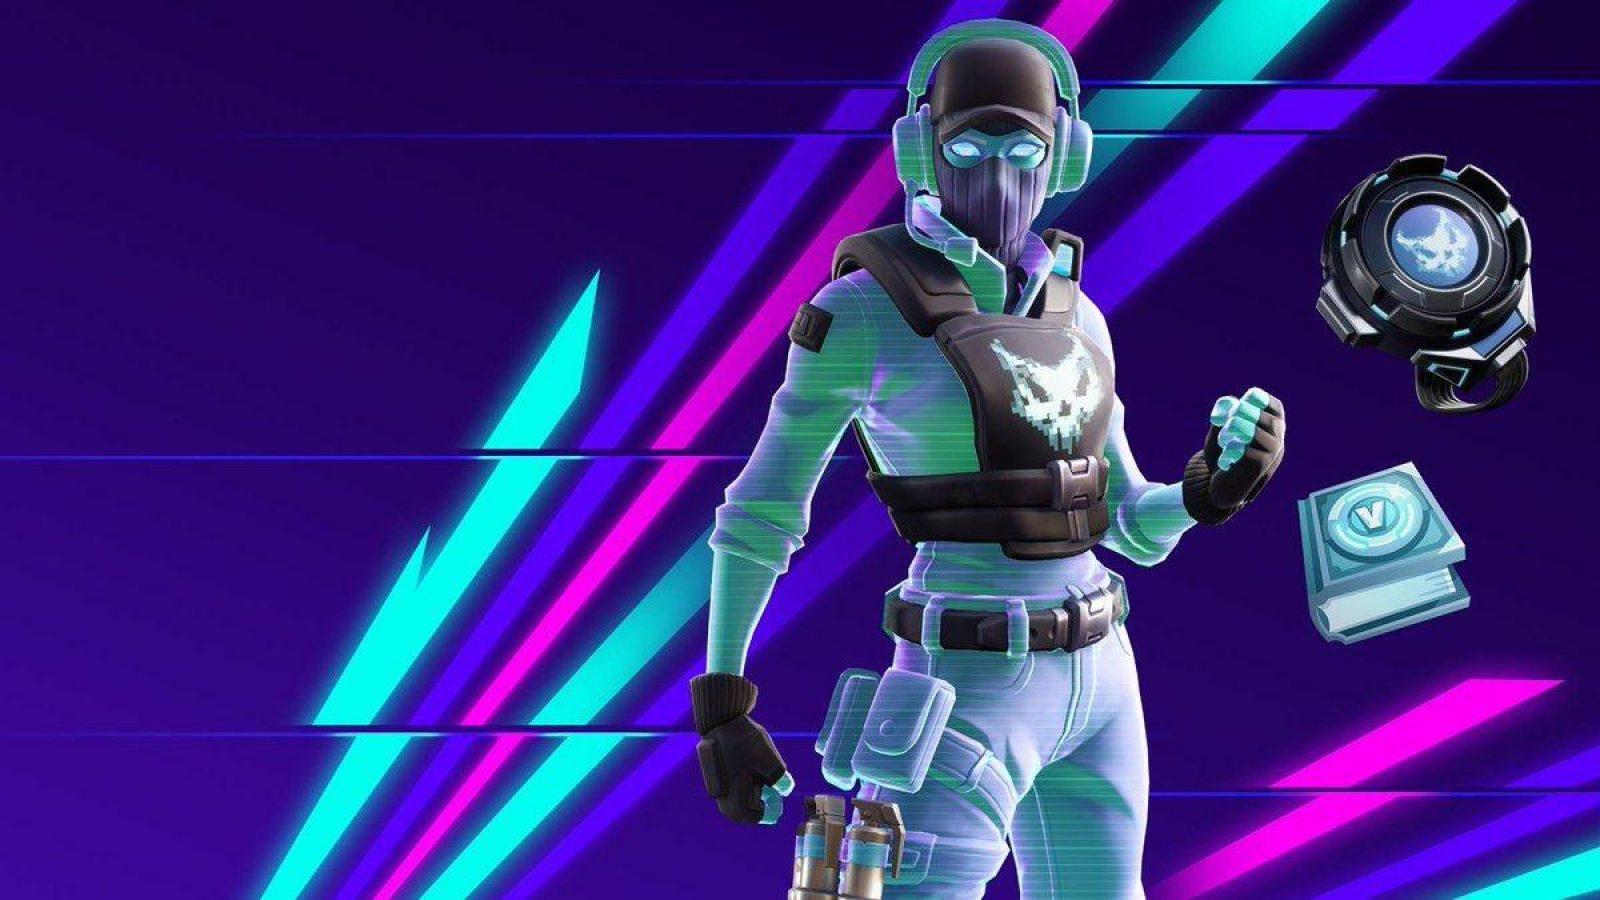 How to get all-new Breakpoint skin and challenge pack in Fortnite - Dexerto